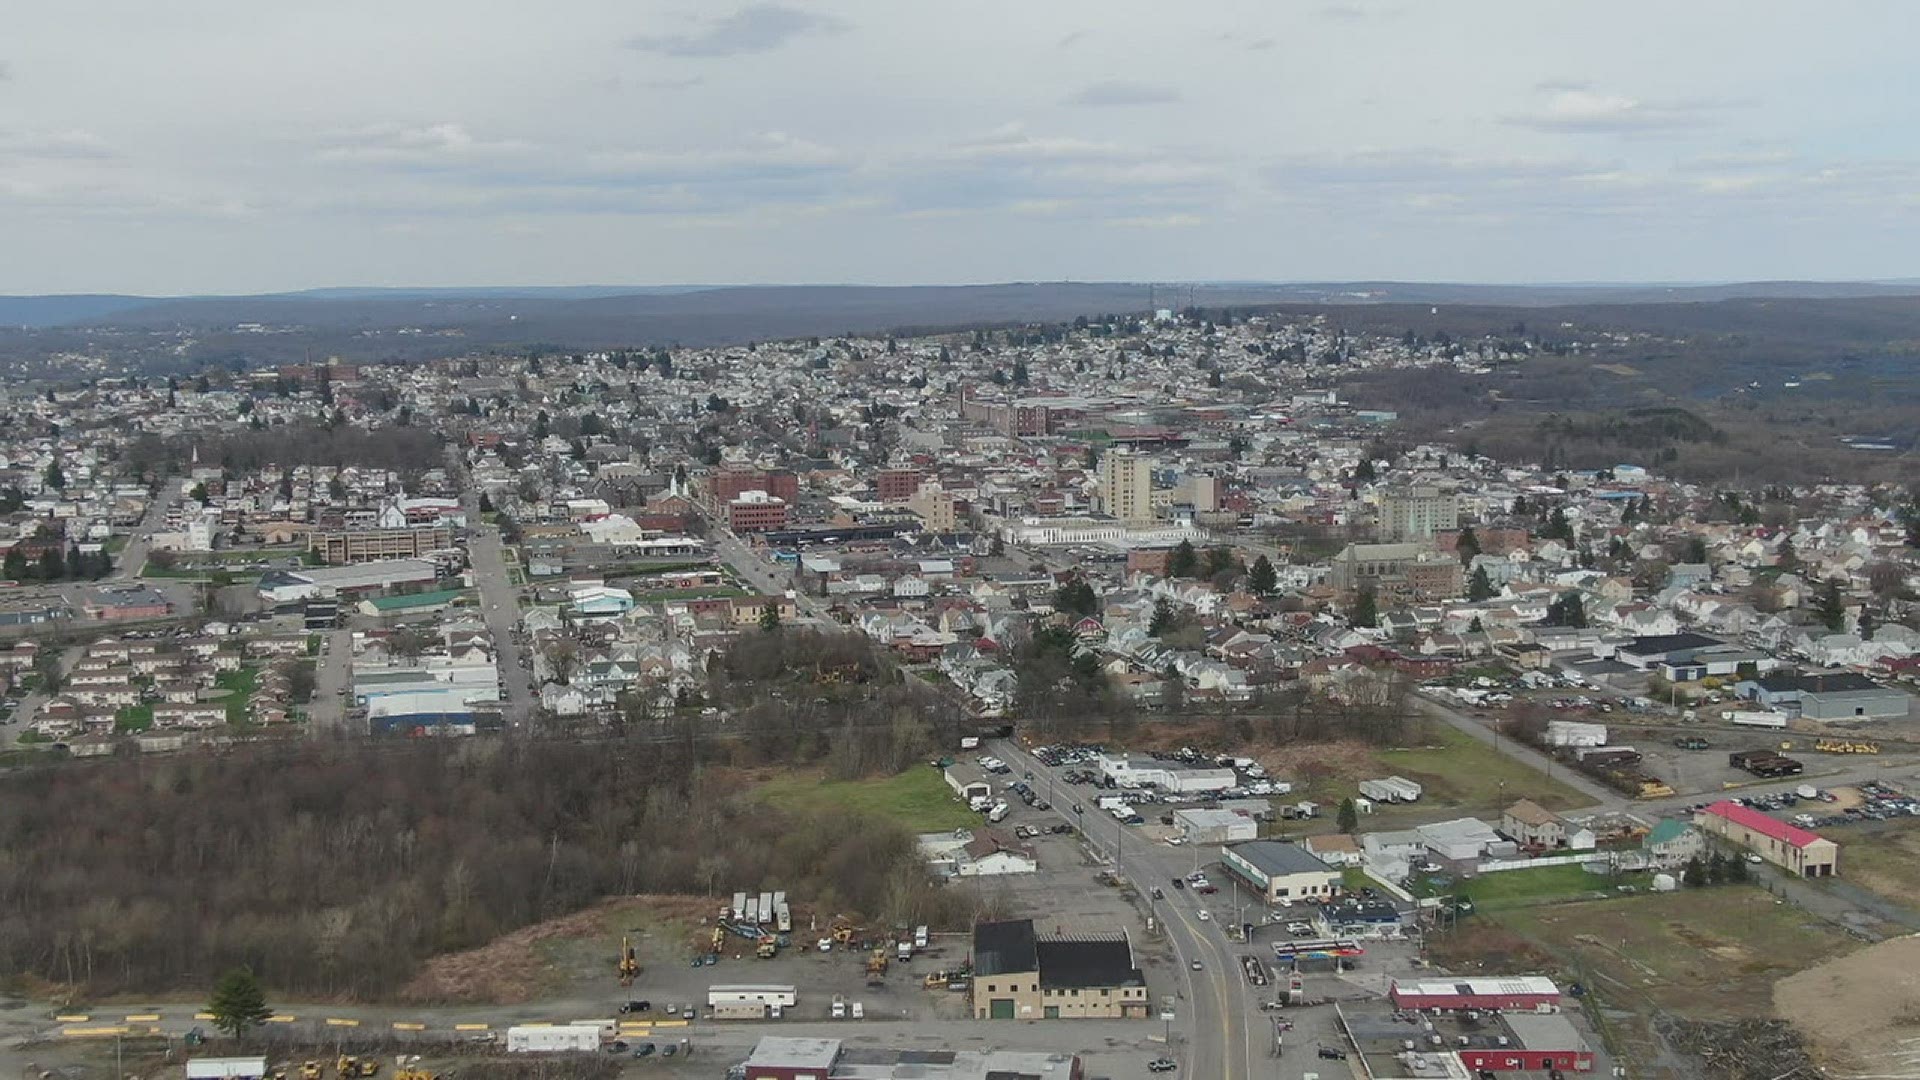 From high above Hazleton, you don't see case numbers or sickness or concern. You see a community.